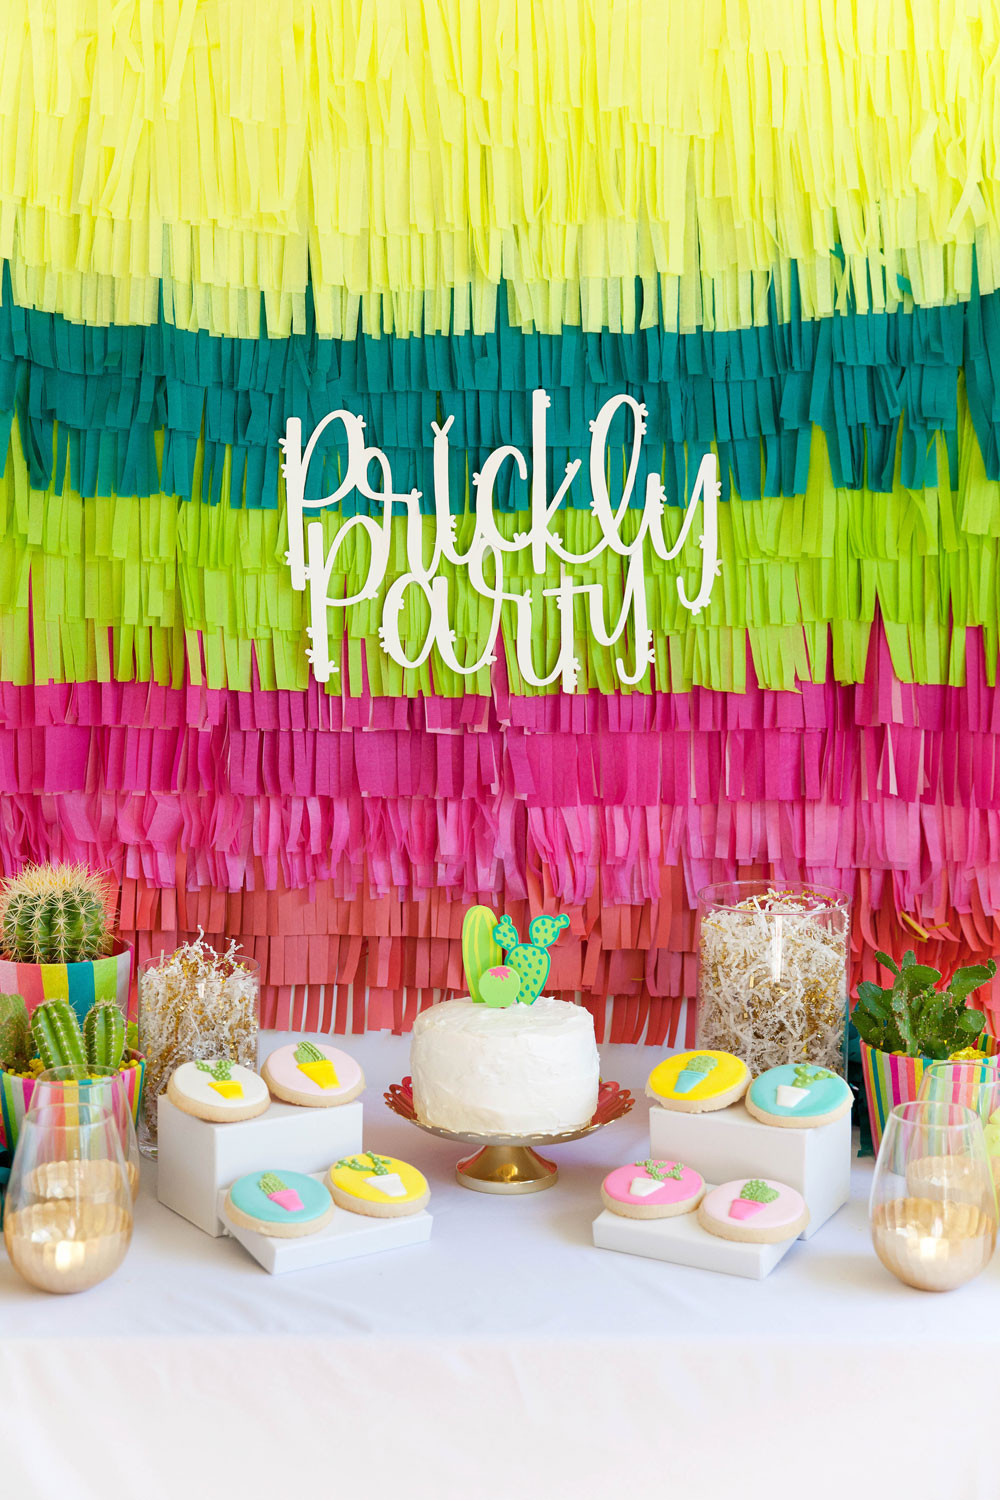 Party Decorations DIY
 DIY CACTUS PARTY Tell Love and Party